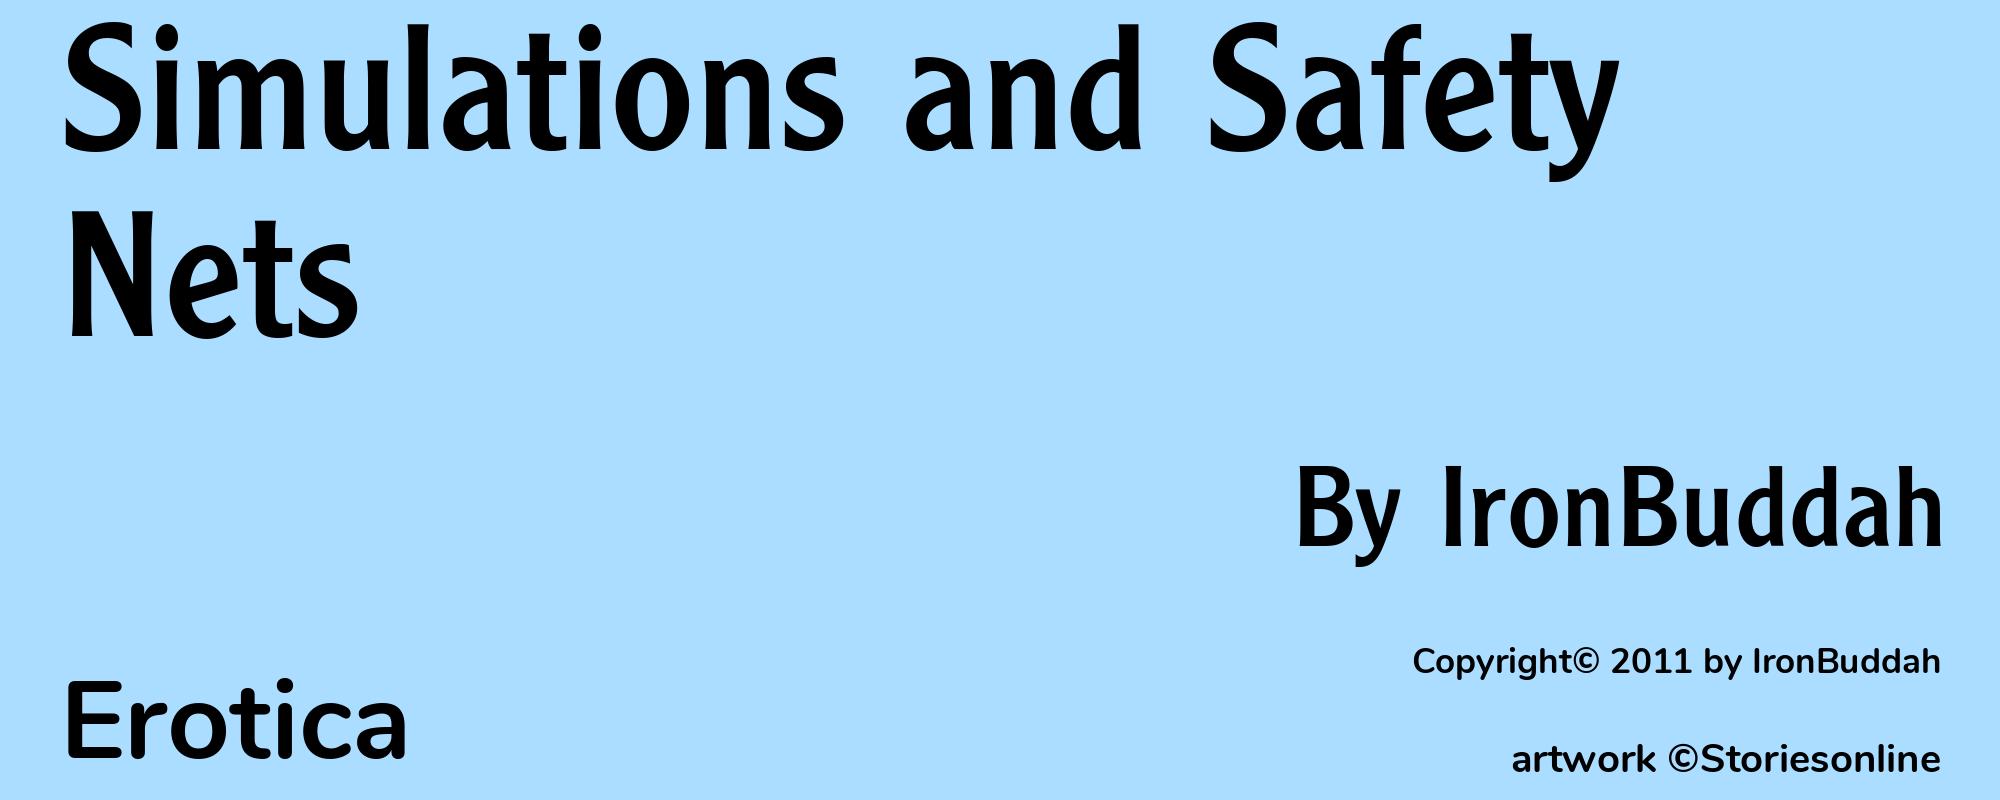 Simulations and Safety Nets - Cover